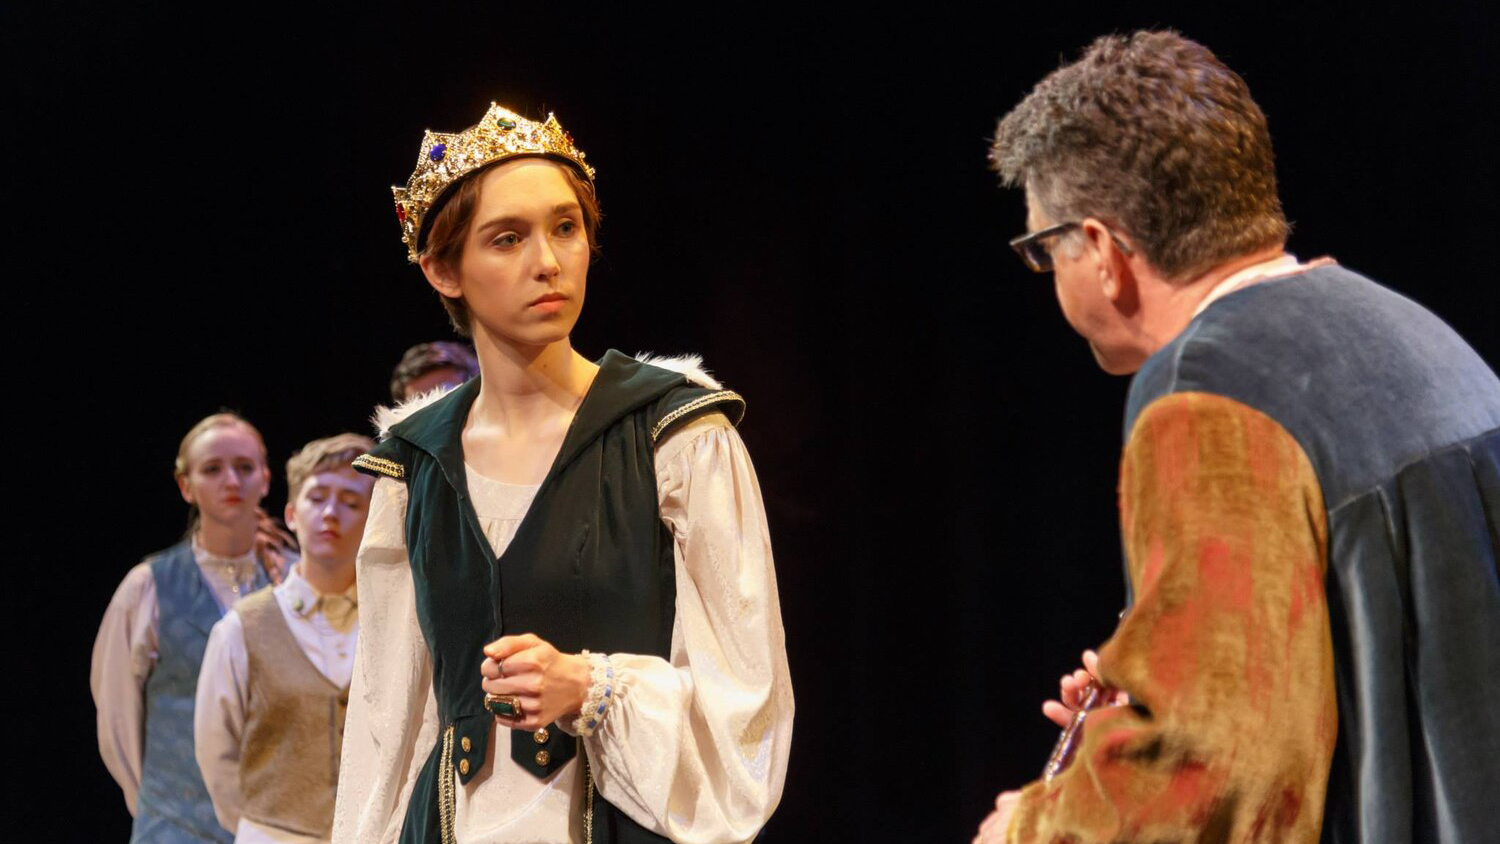 Actors perform in Richard II. One faces the camera wearing a crown.